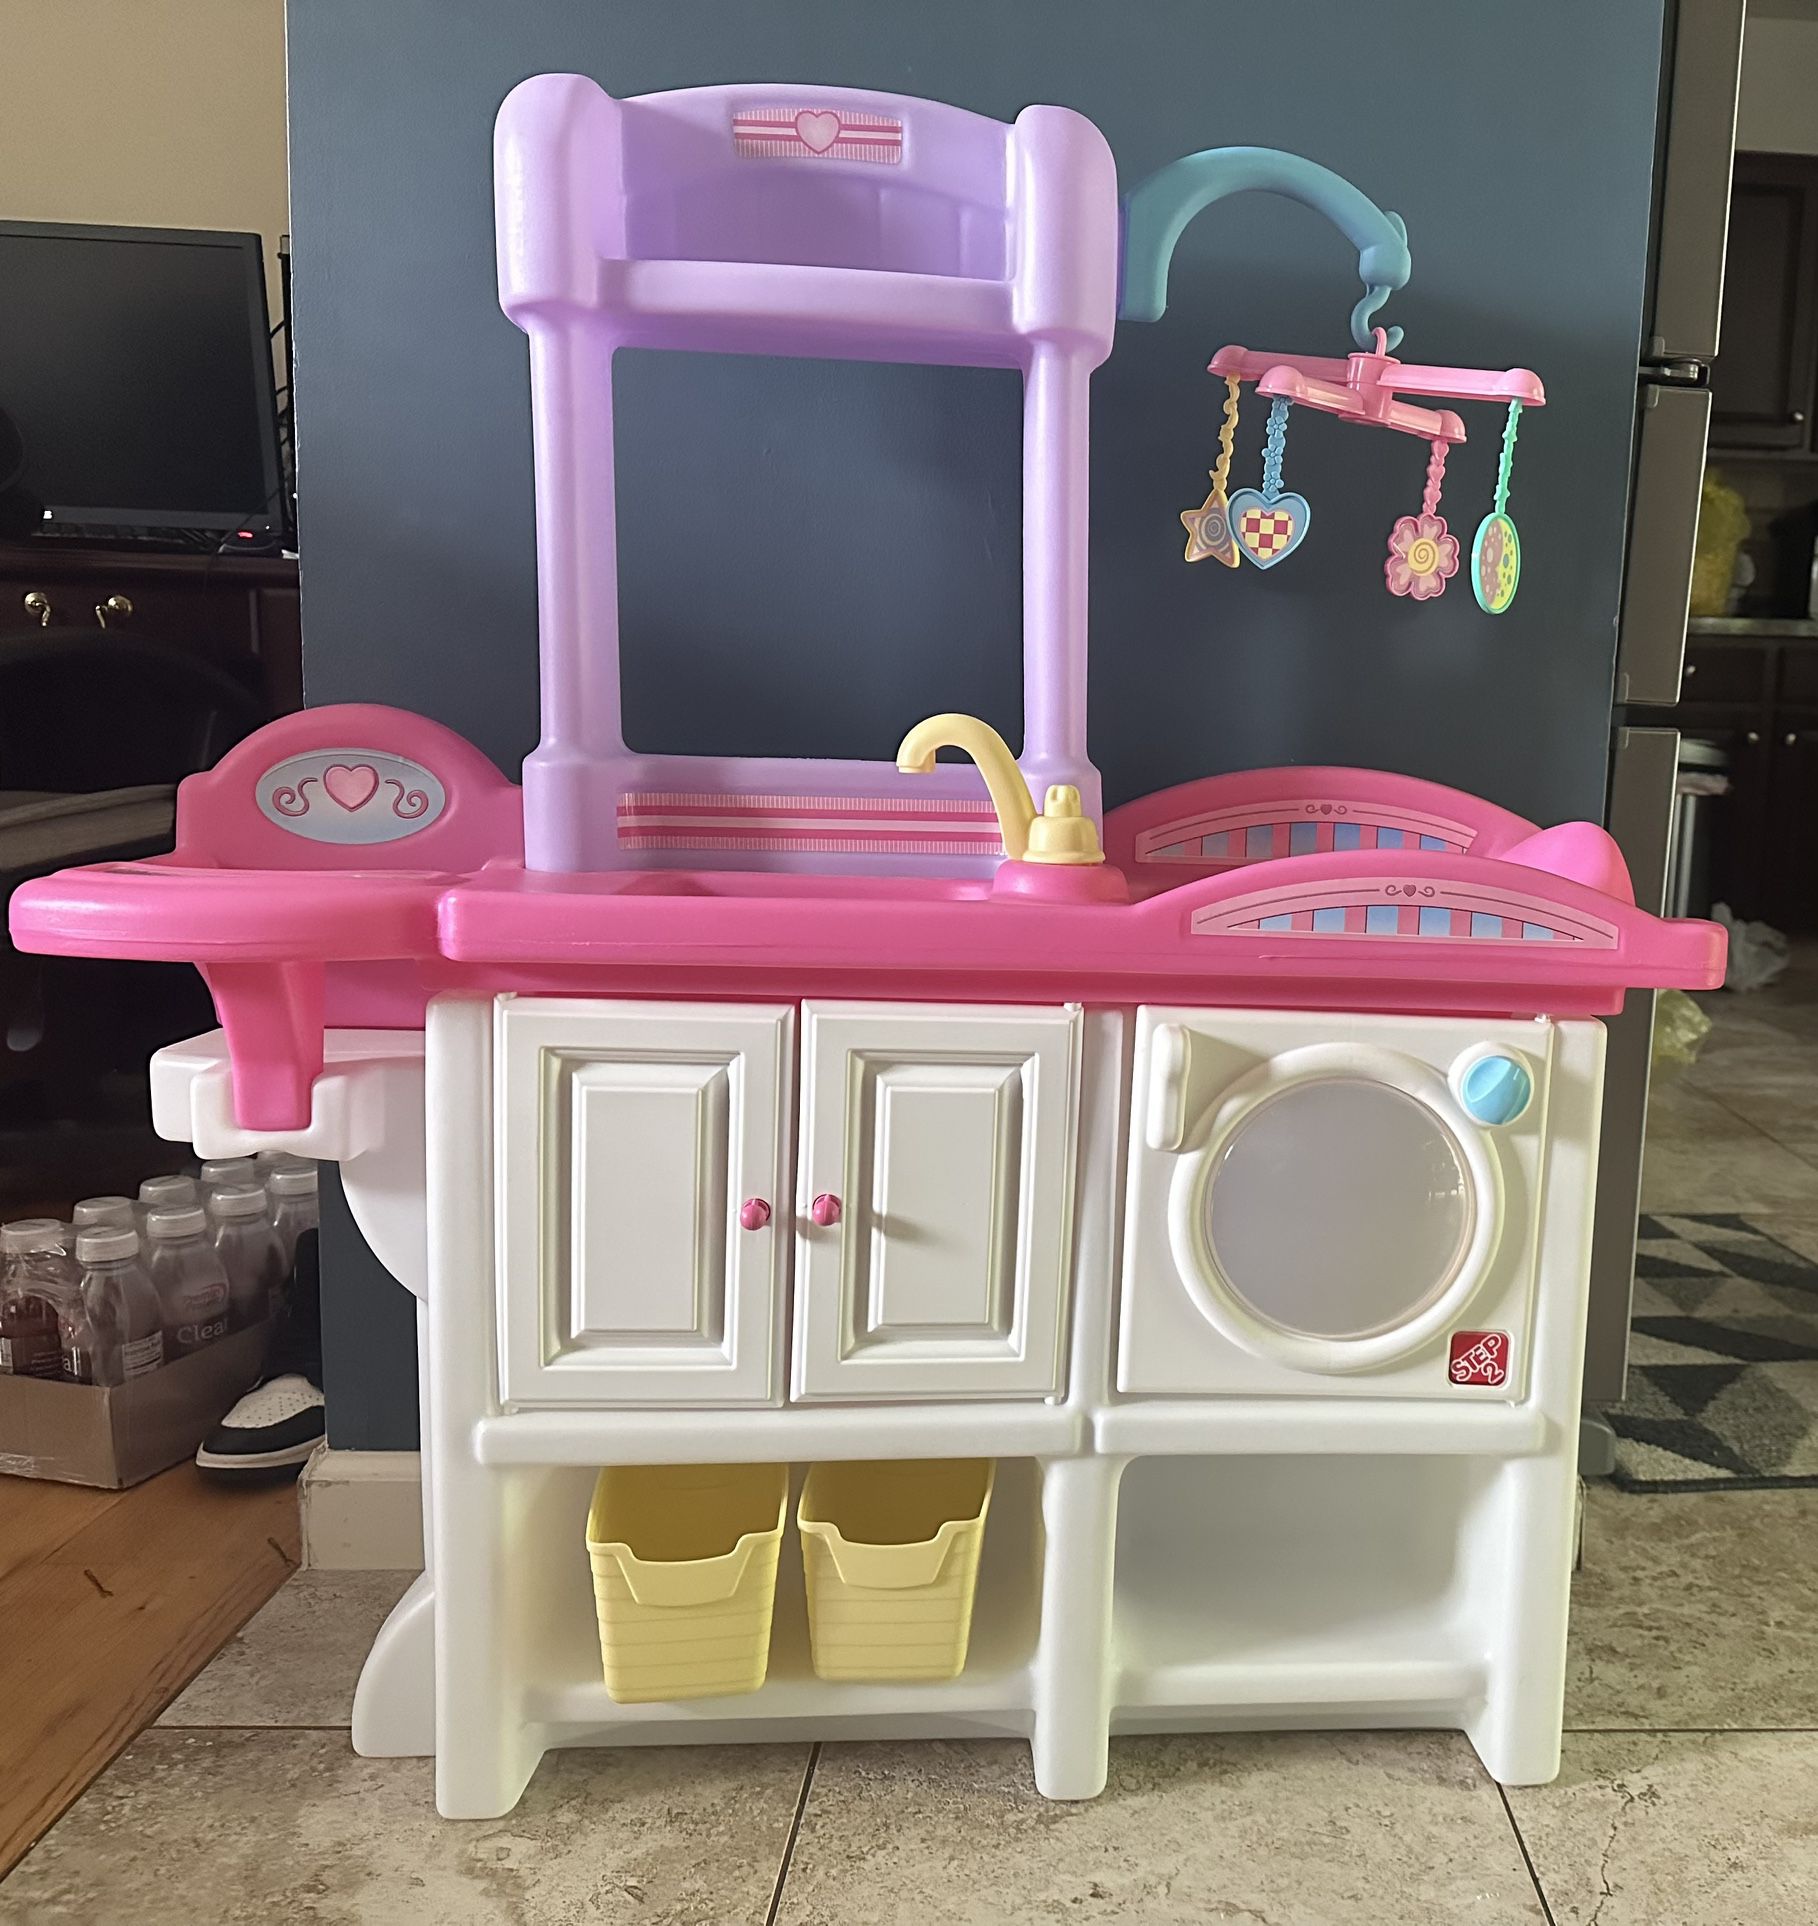 Love & Care Deluxe Baby Doll Nursery Playset